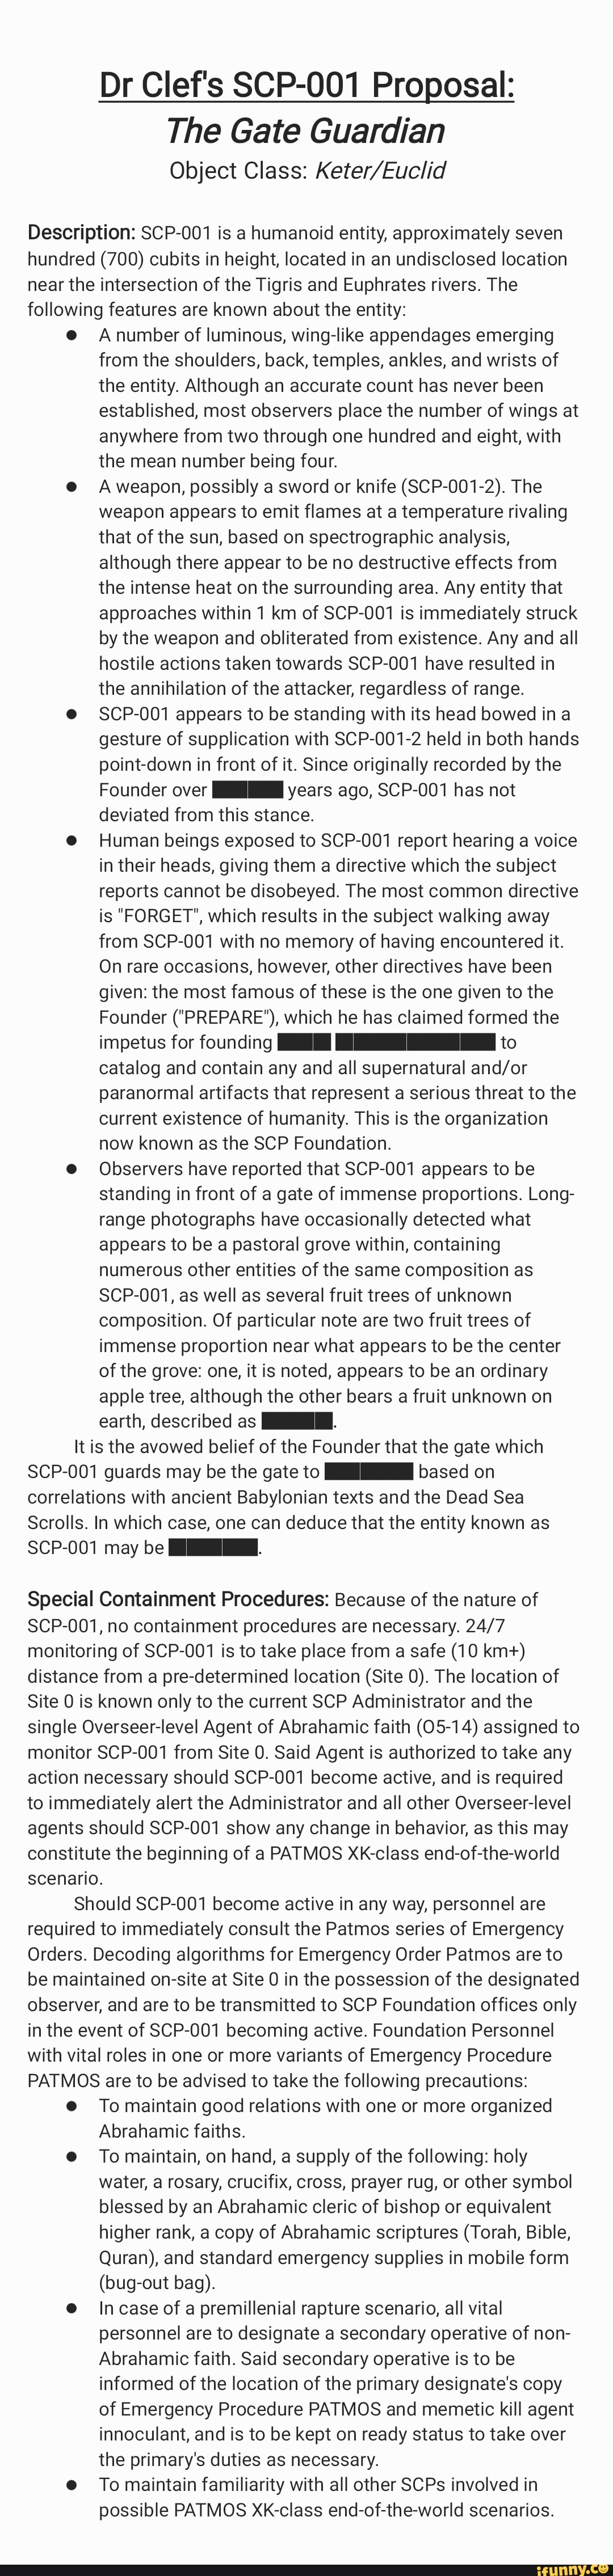 SCP-001 (Dr.Clef's Proposal), Fiction Taxonomy Wiki